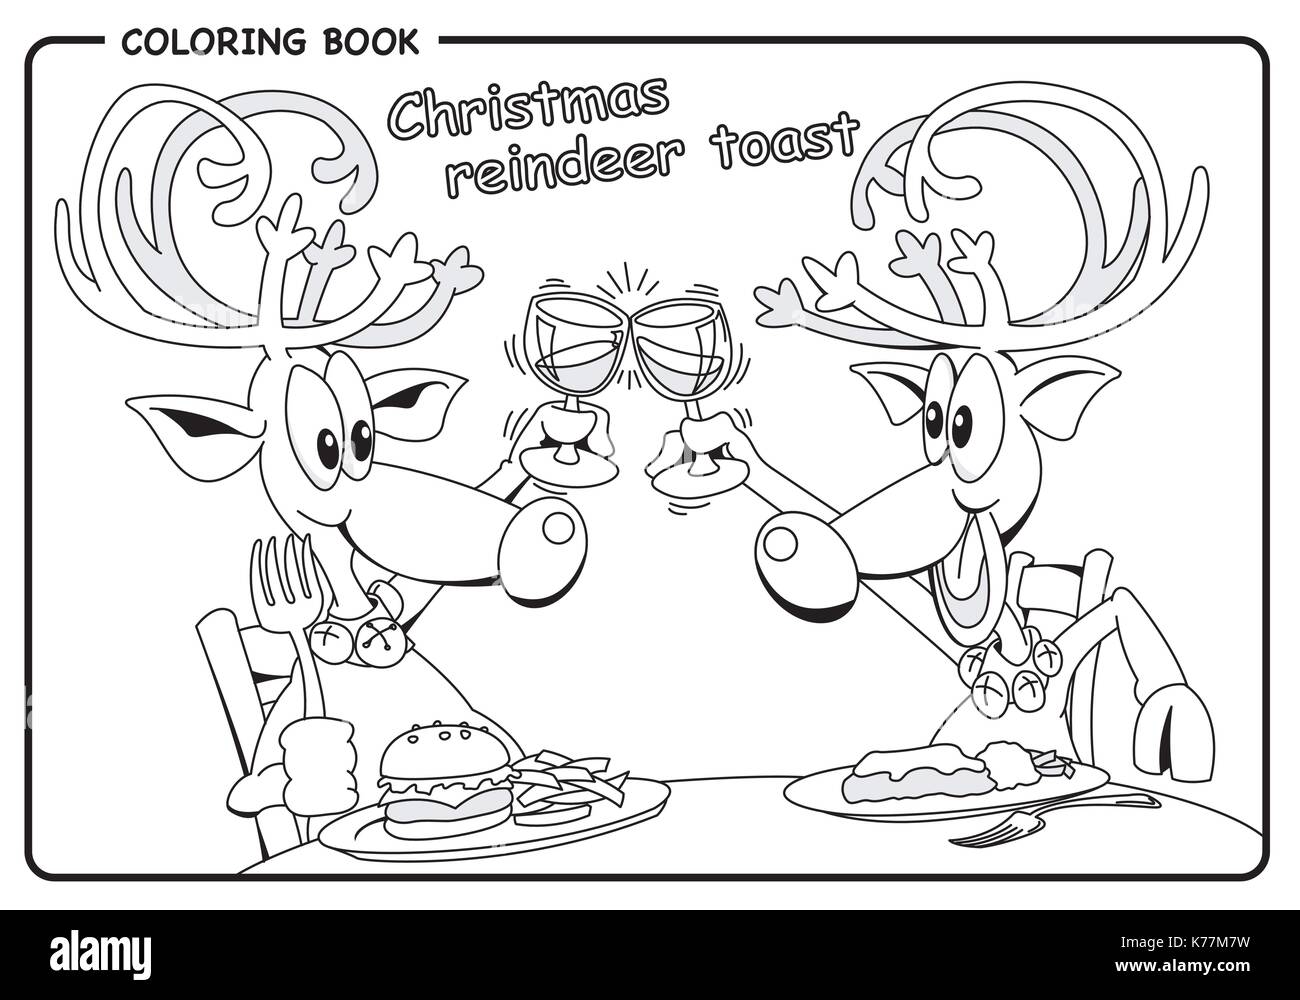 Reindeer dining and toasting with wine glass  - Coloring draw. Vector image Stock Vector